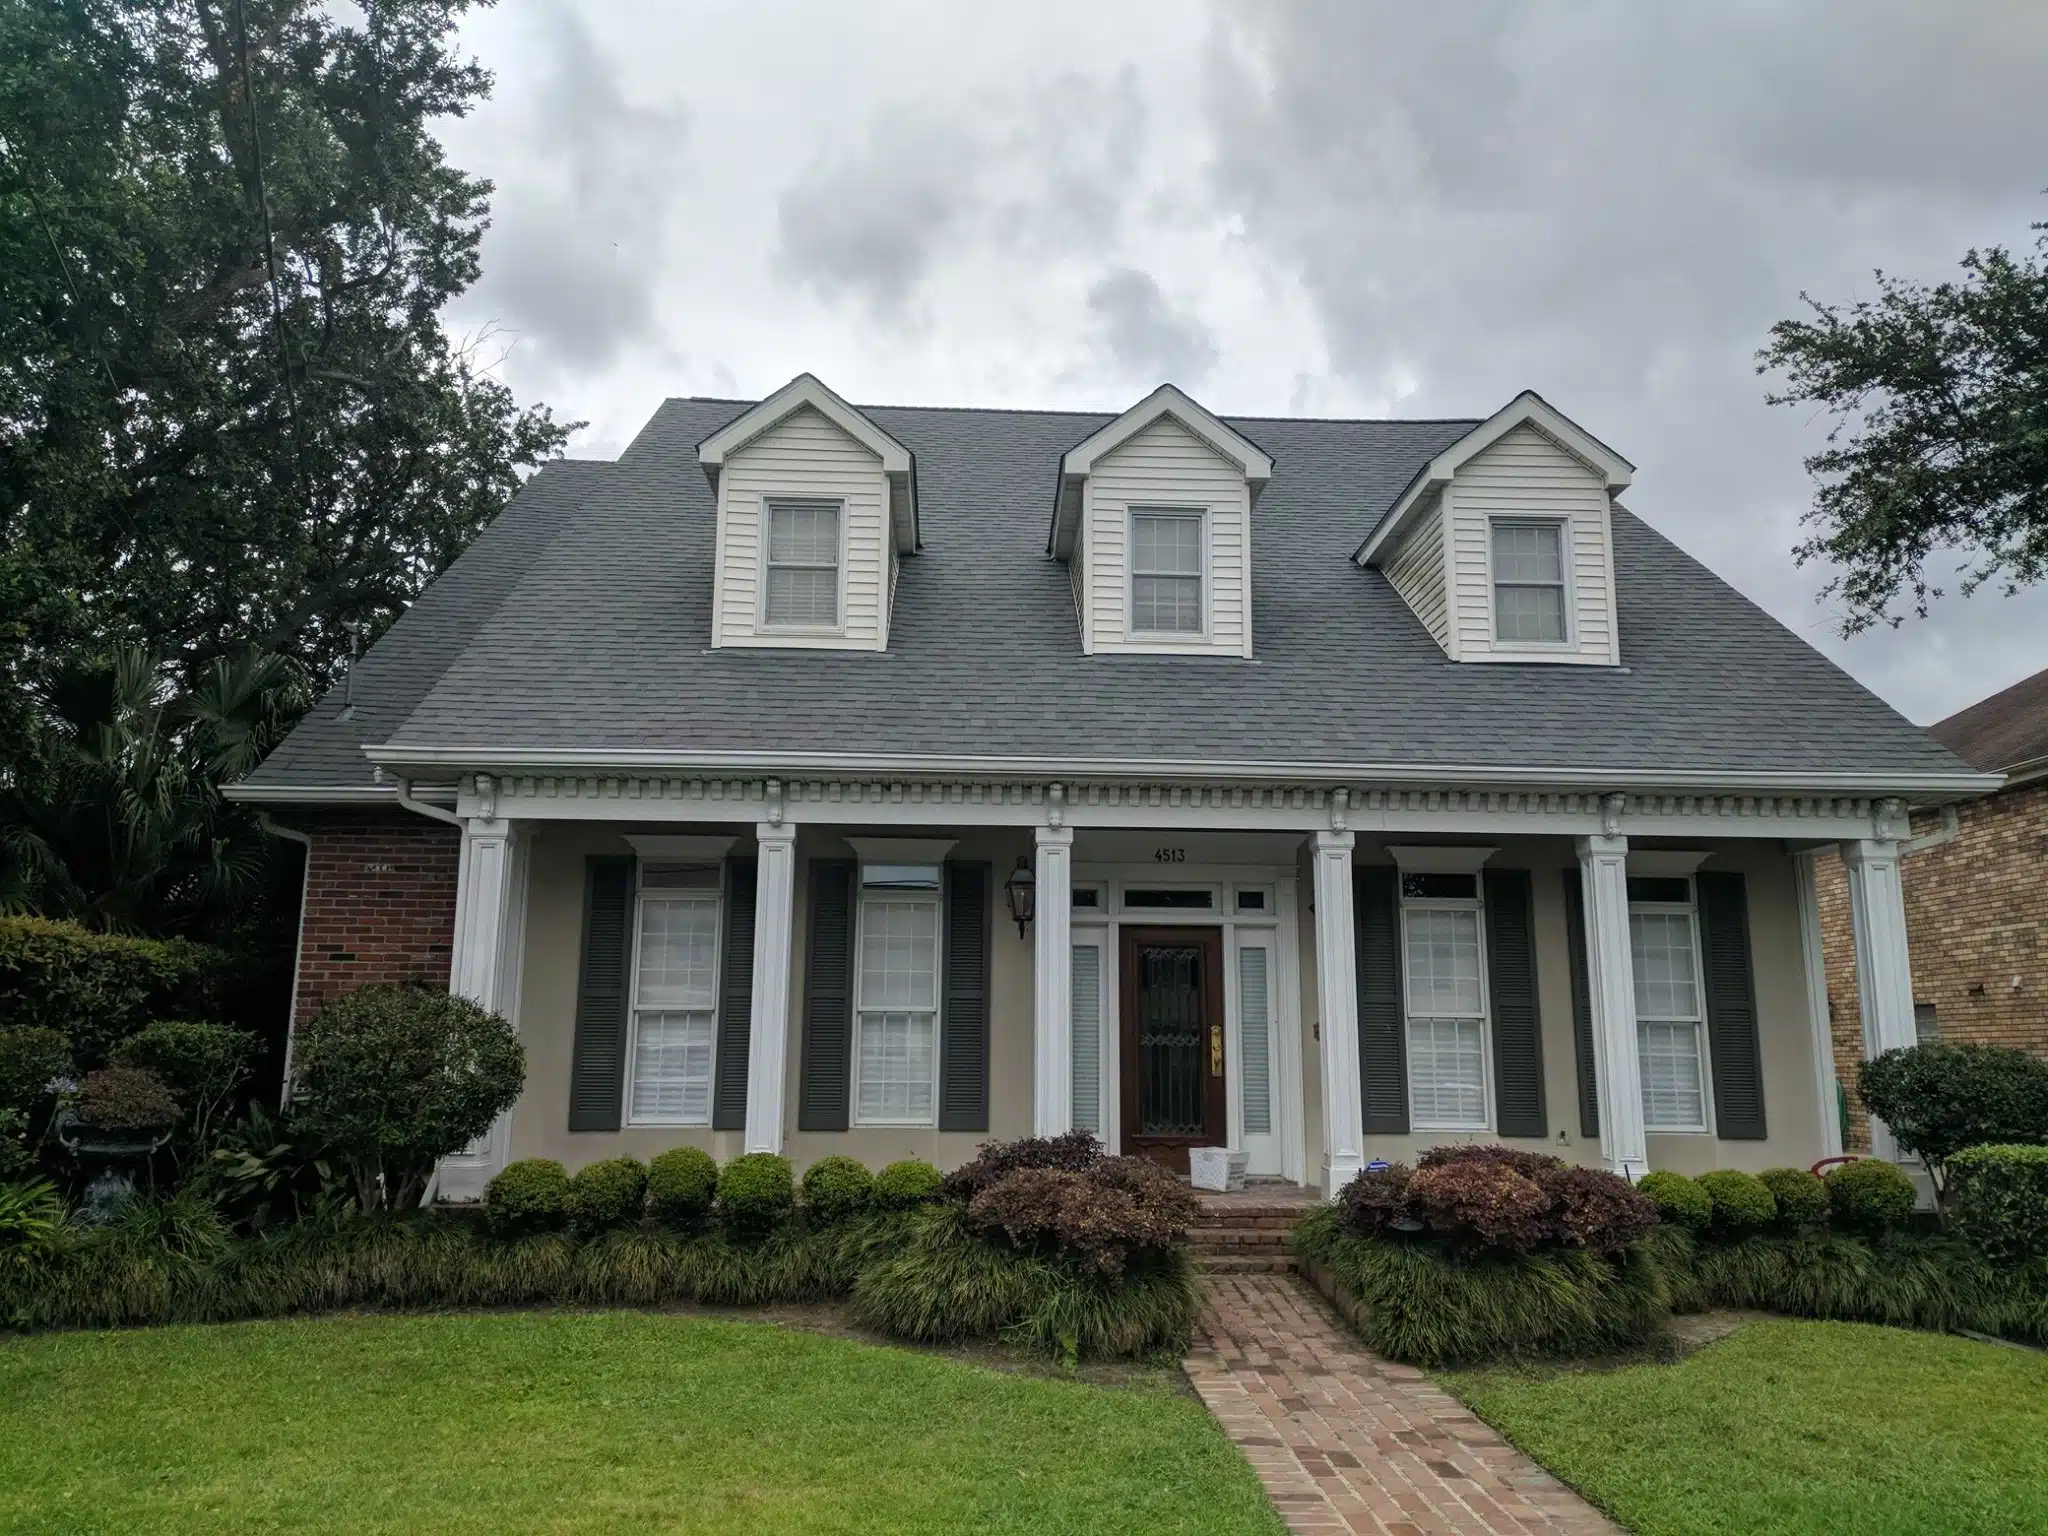 roof replacement residential project paid by financing plans offered by stormguard in slidell